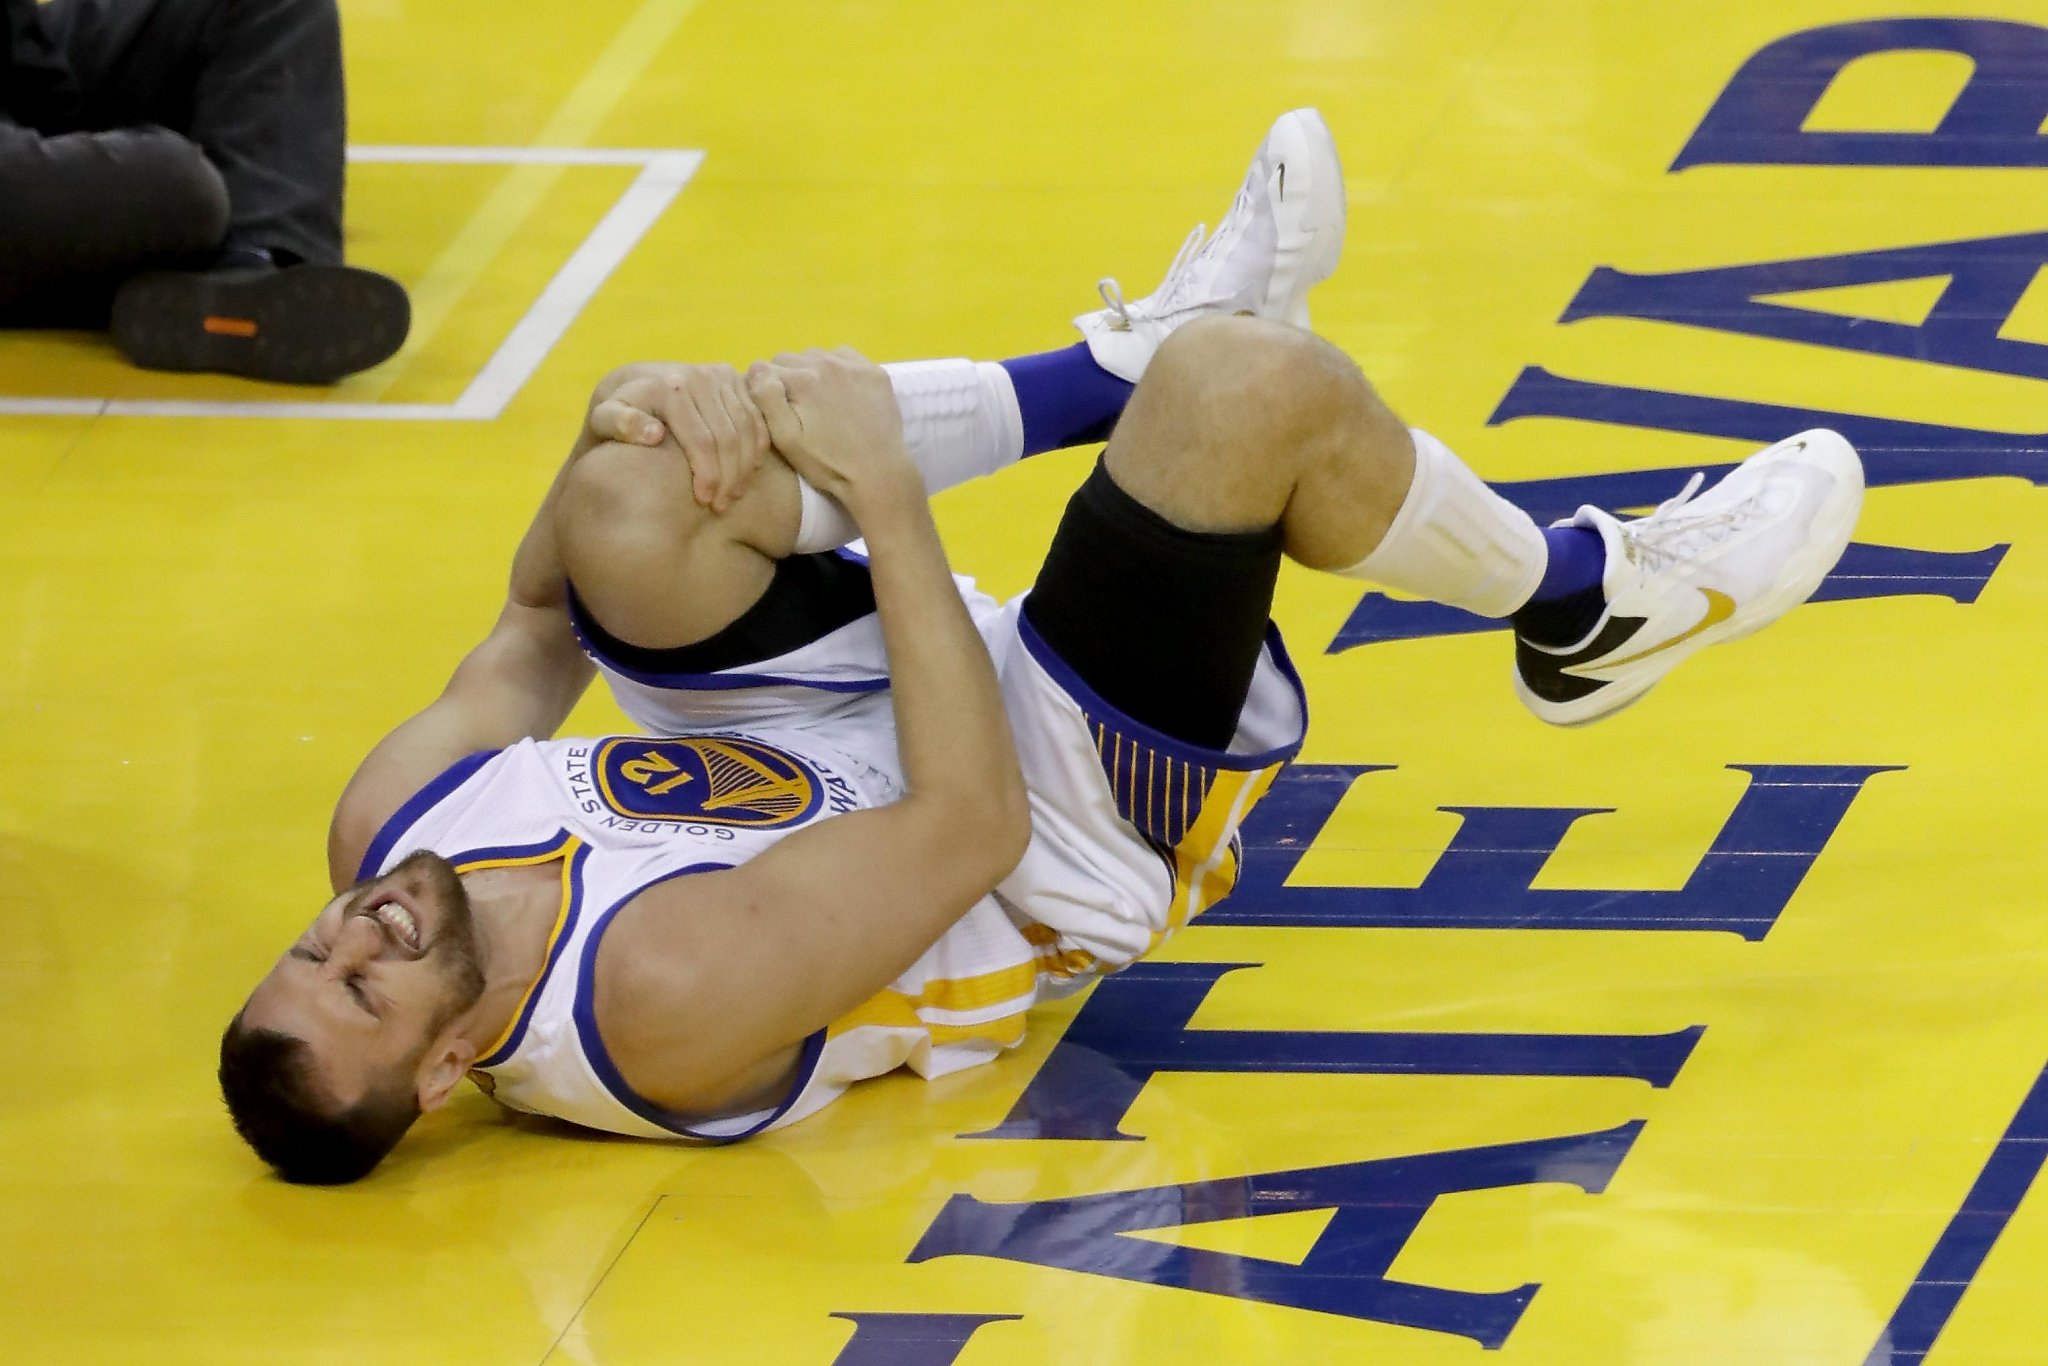 Warriors lose Andrew Bogut for remainder of NBA Finals with left knee injury